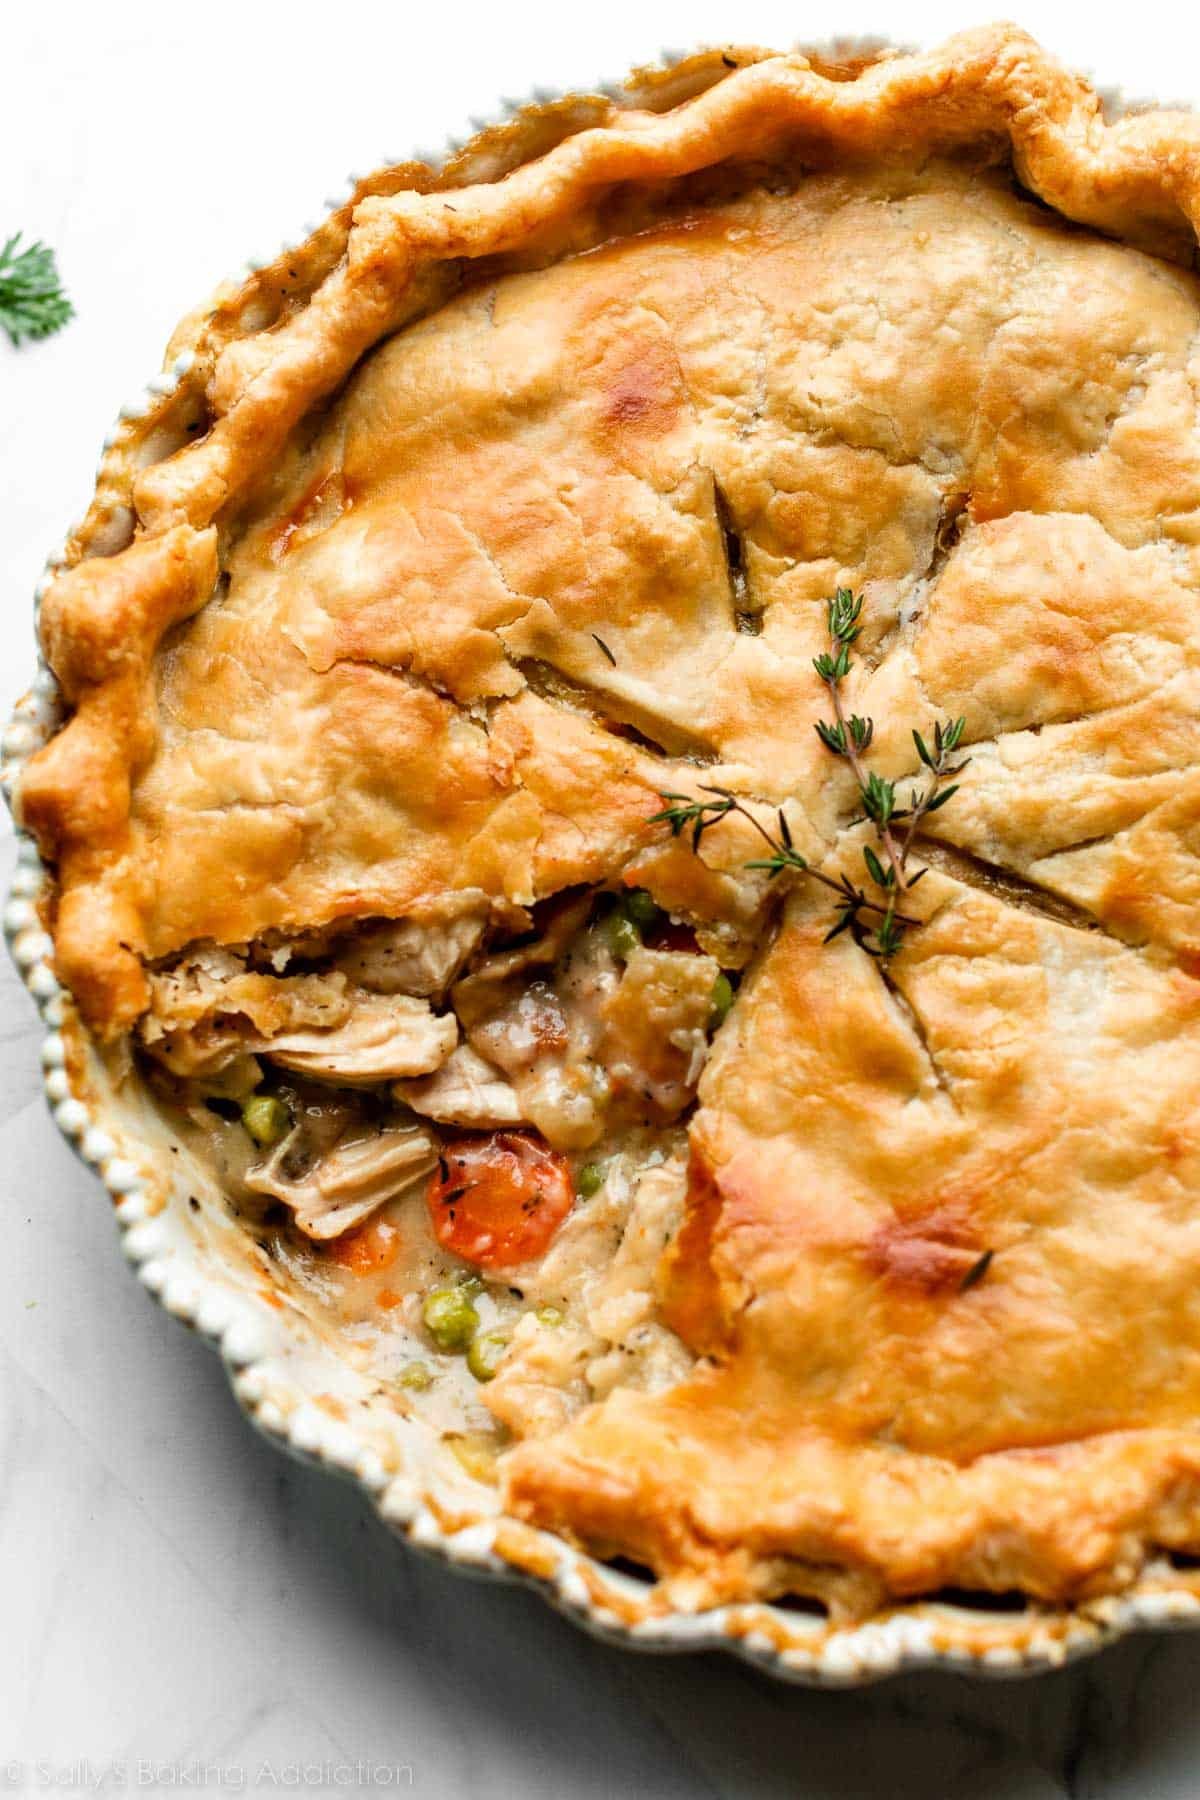 turkey pot pie with 1 slice removed to show carrots, peas, turkey, and gravy filling.